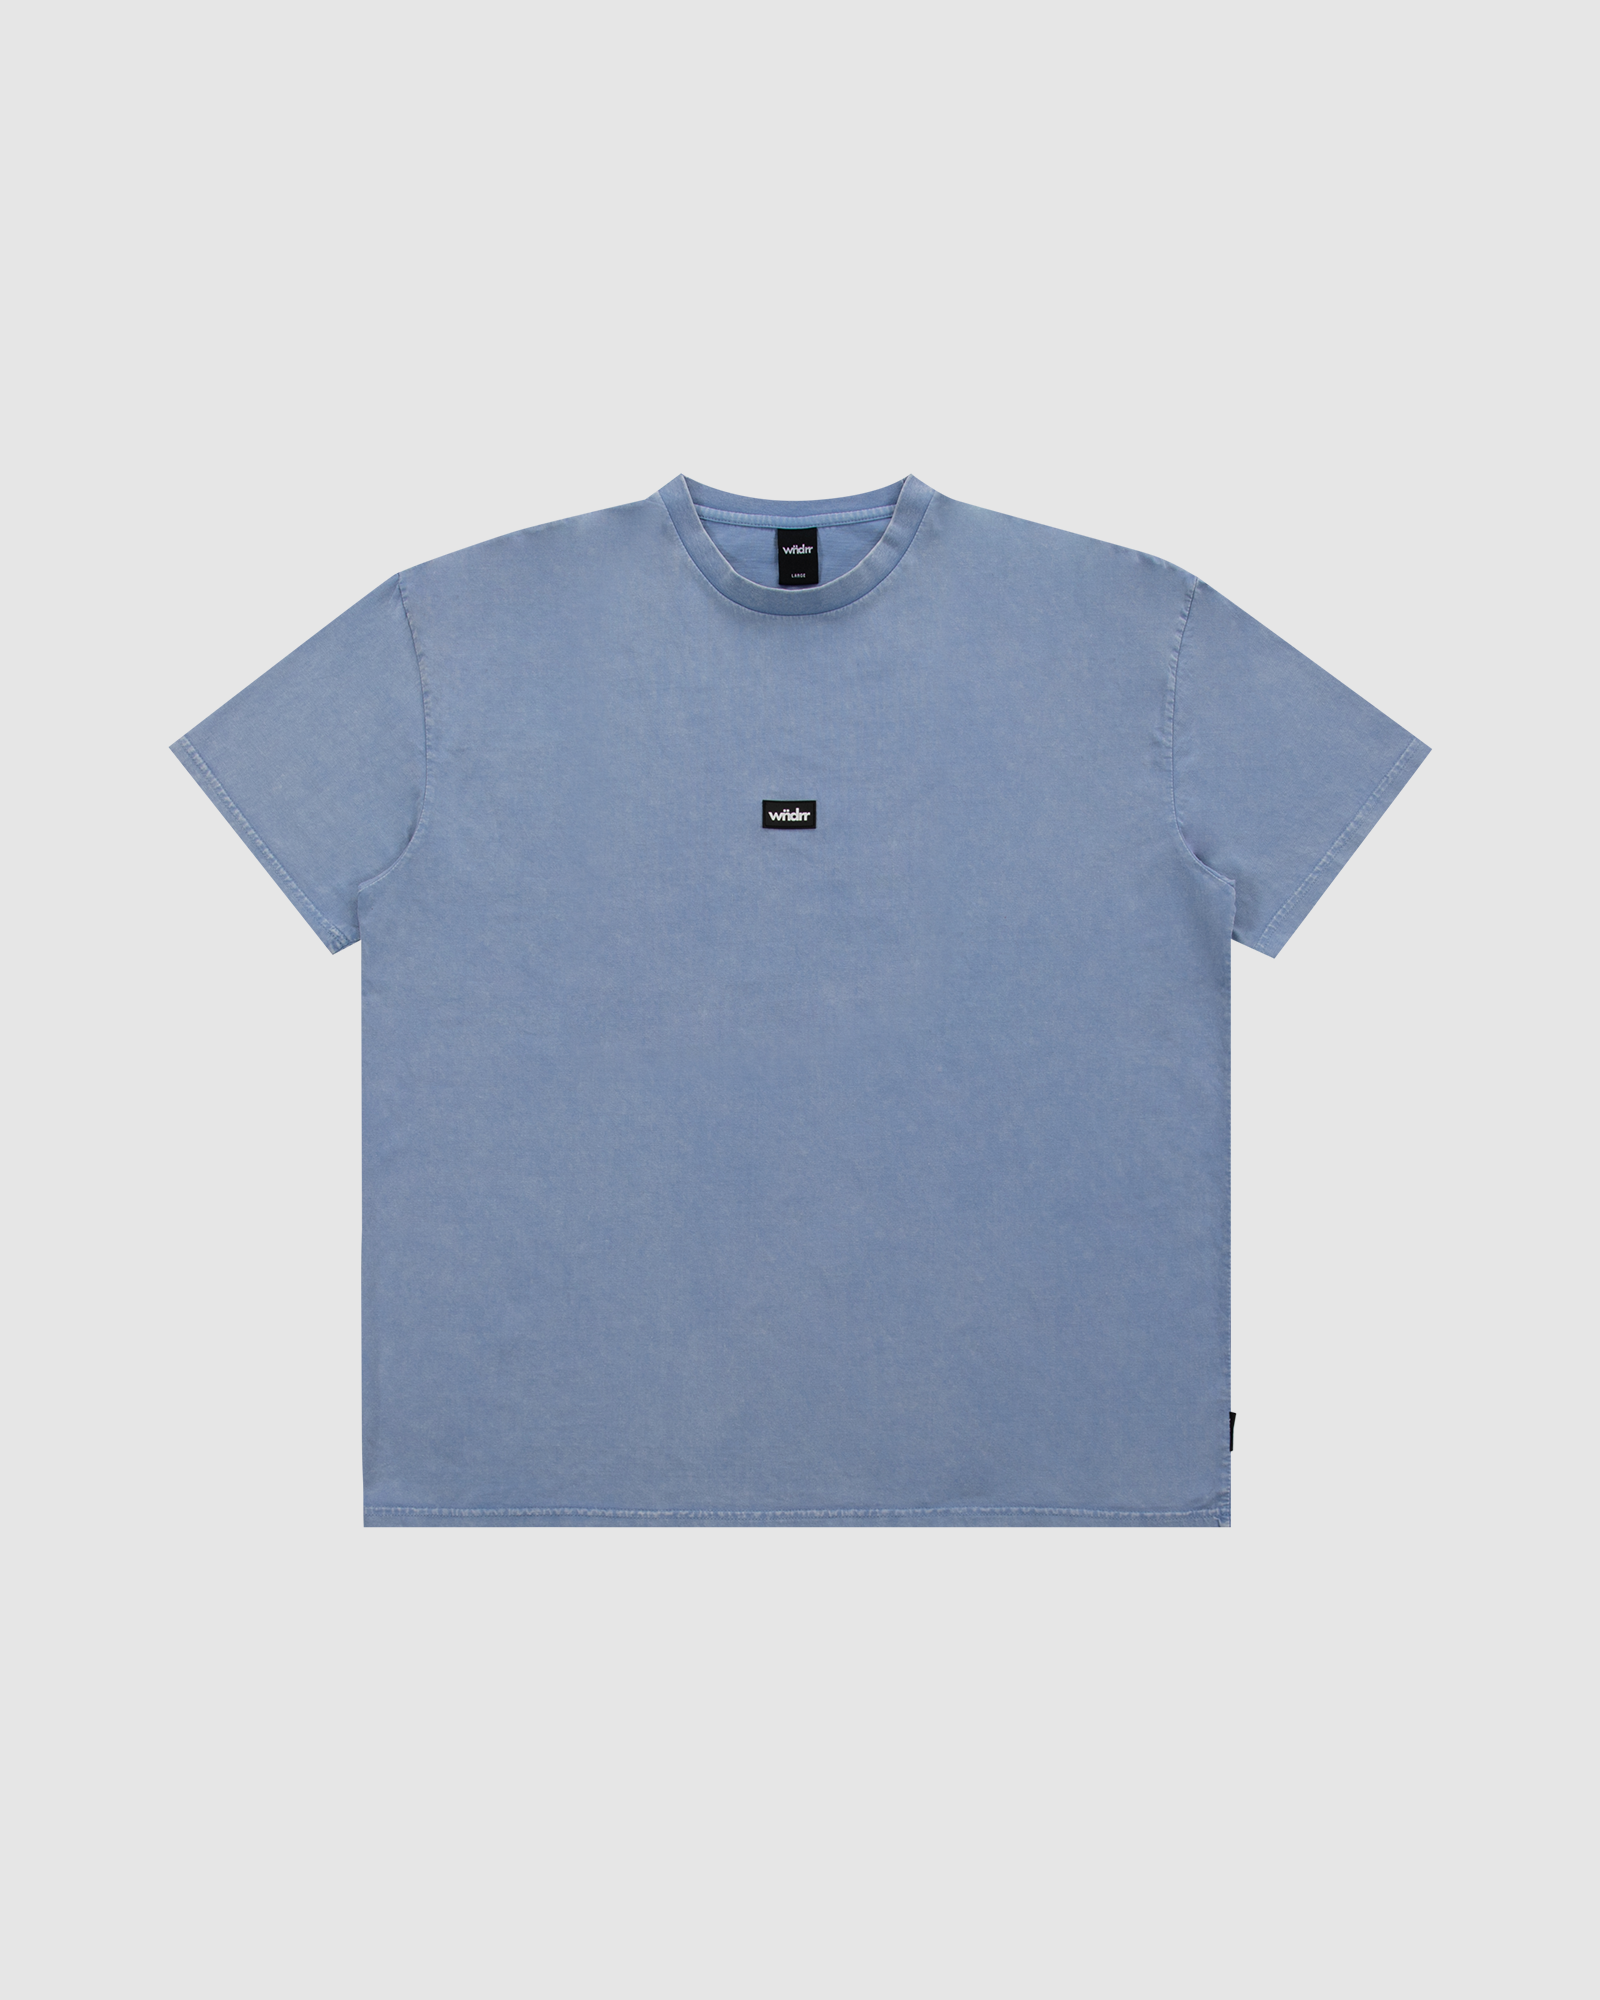 HOXTON VINTAGE FIT TEE - WASHED BLUE